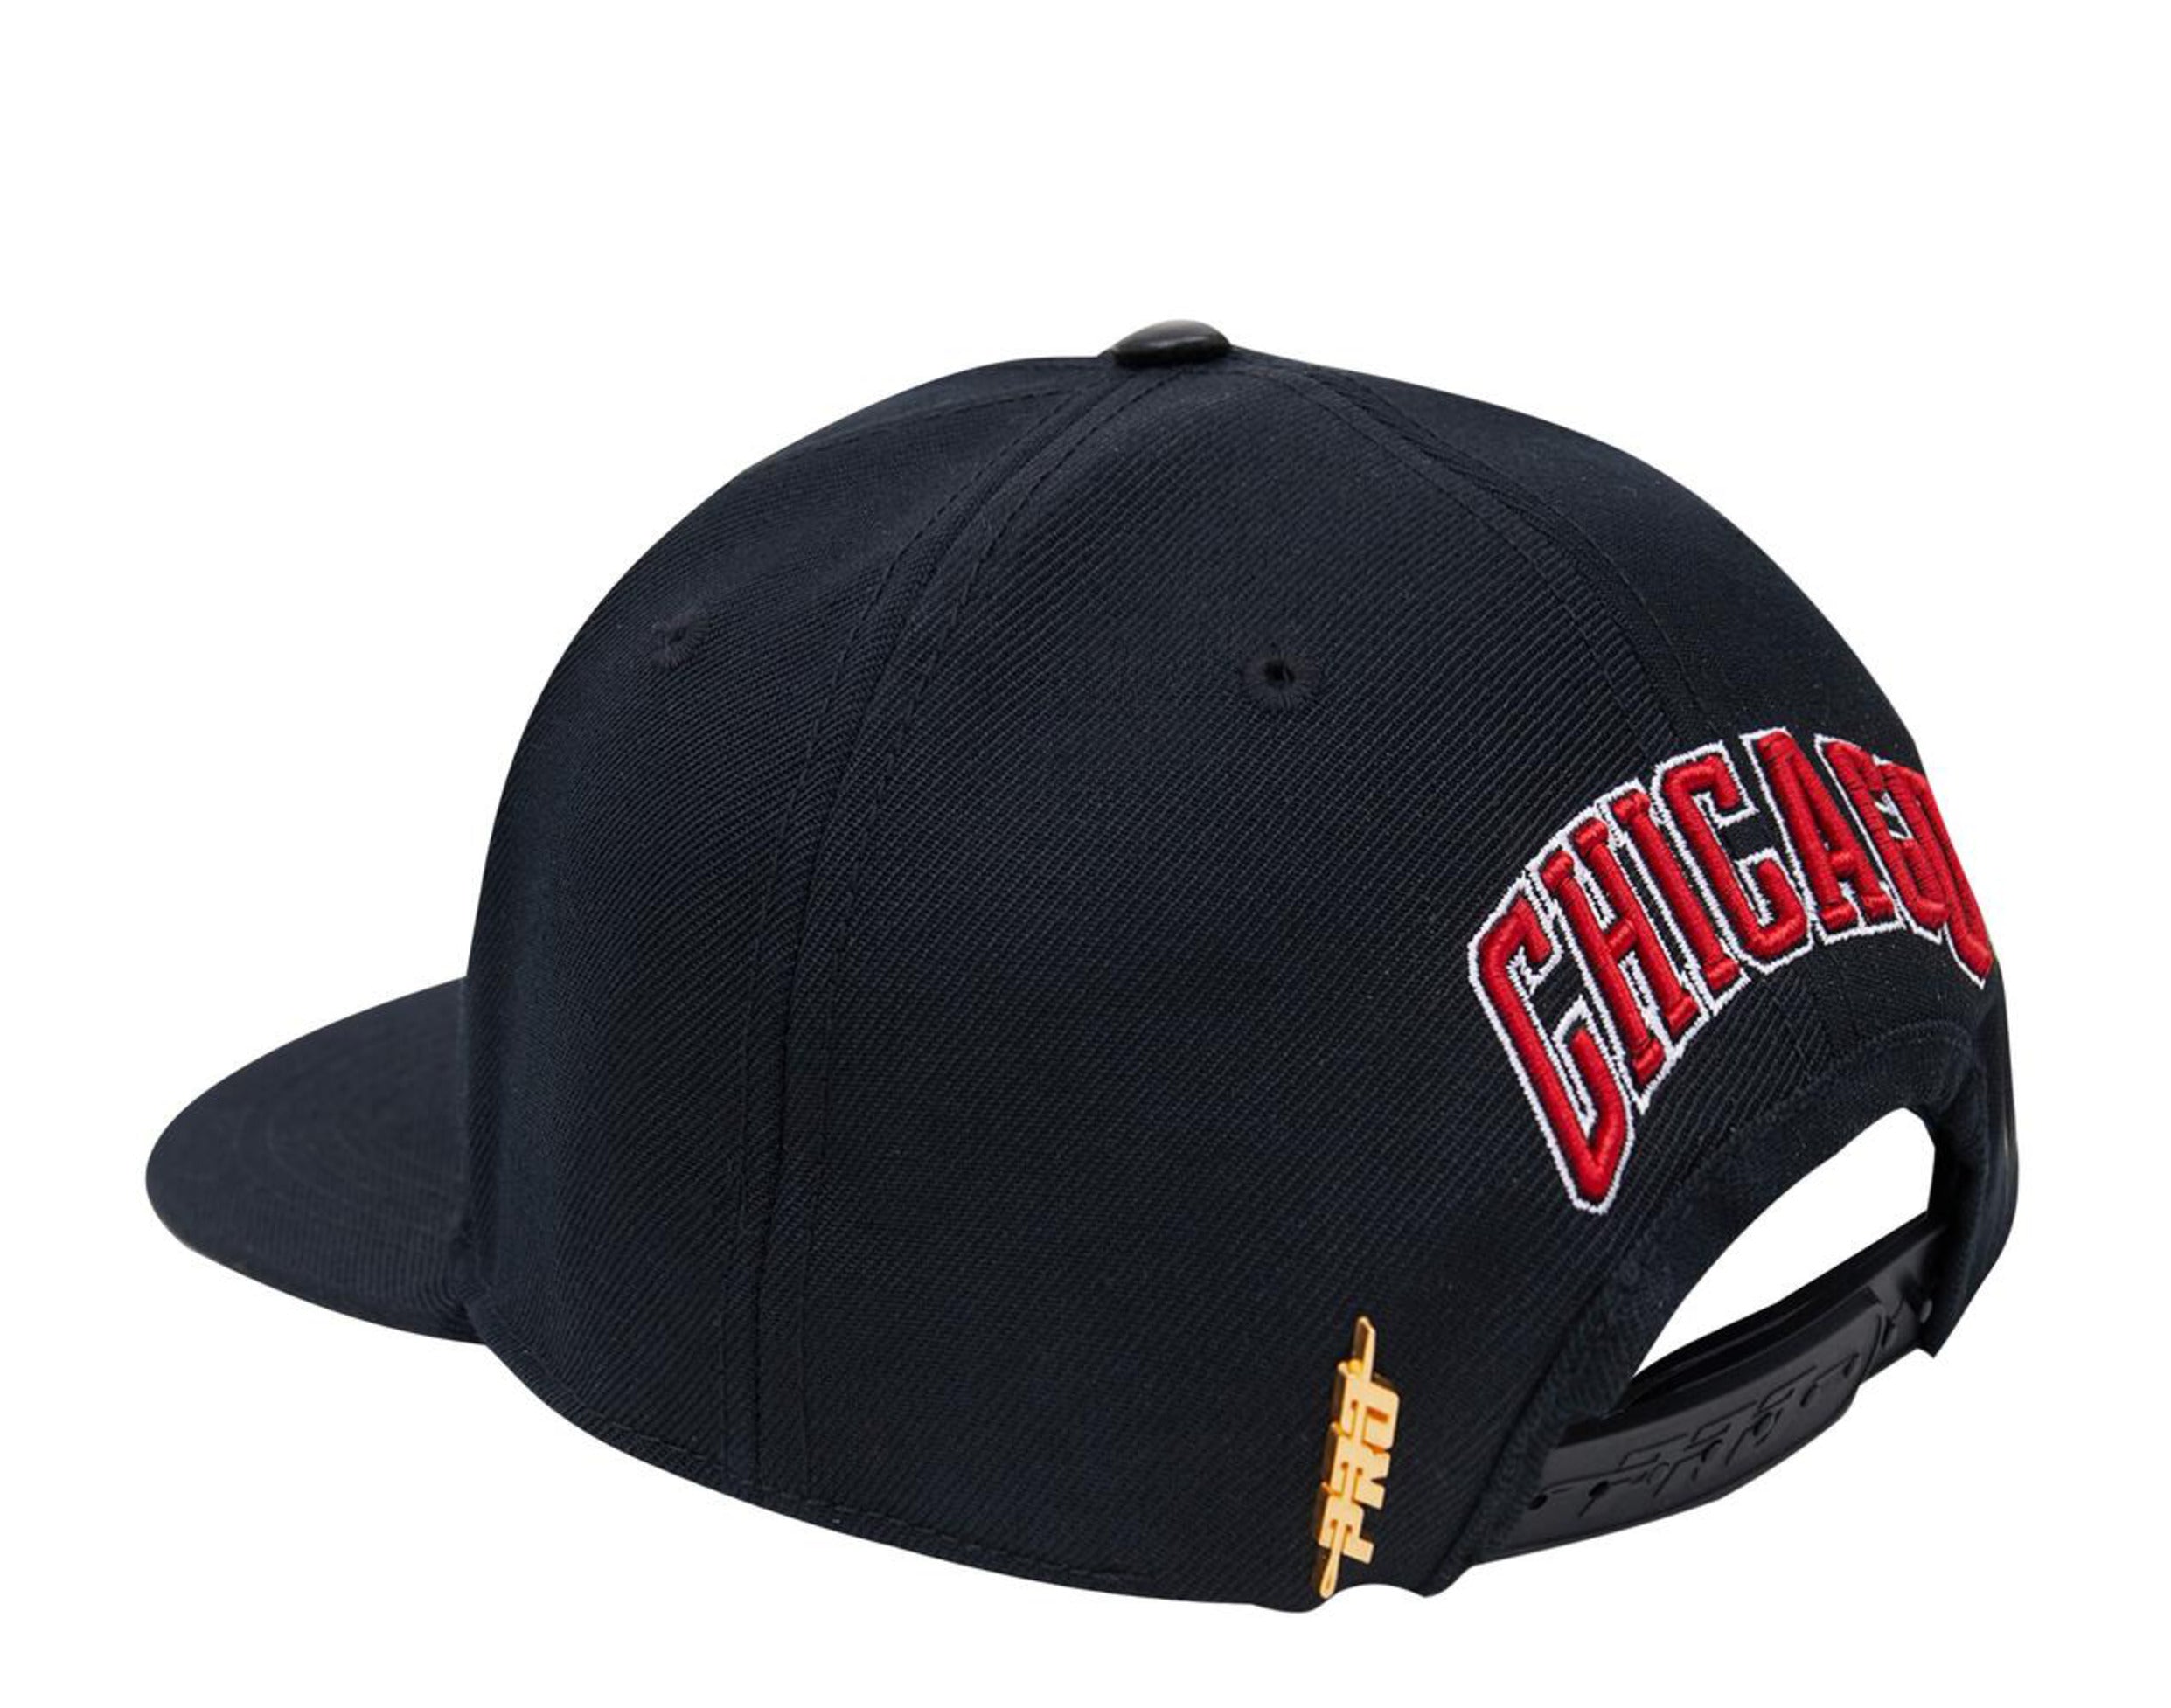 Pro Standard Bulls Roses Snapback Hat in Red/Pink Underbrim One Size | WSS